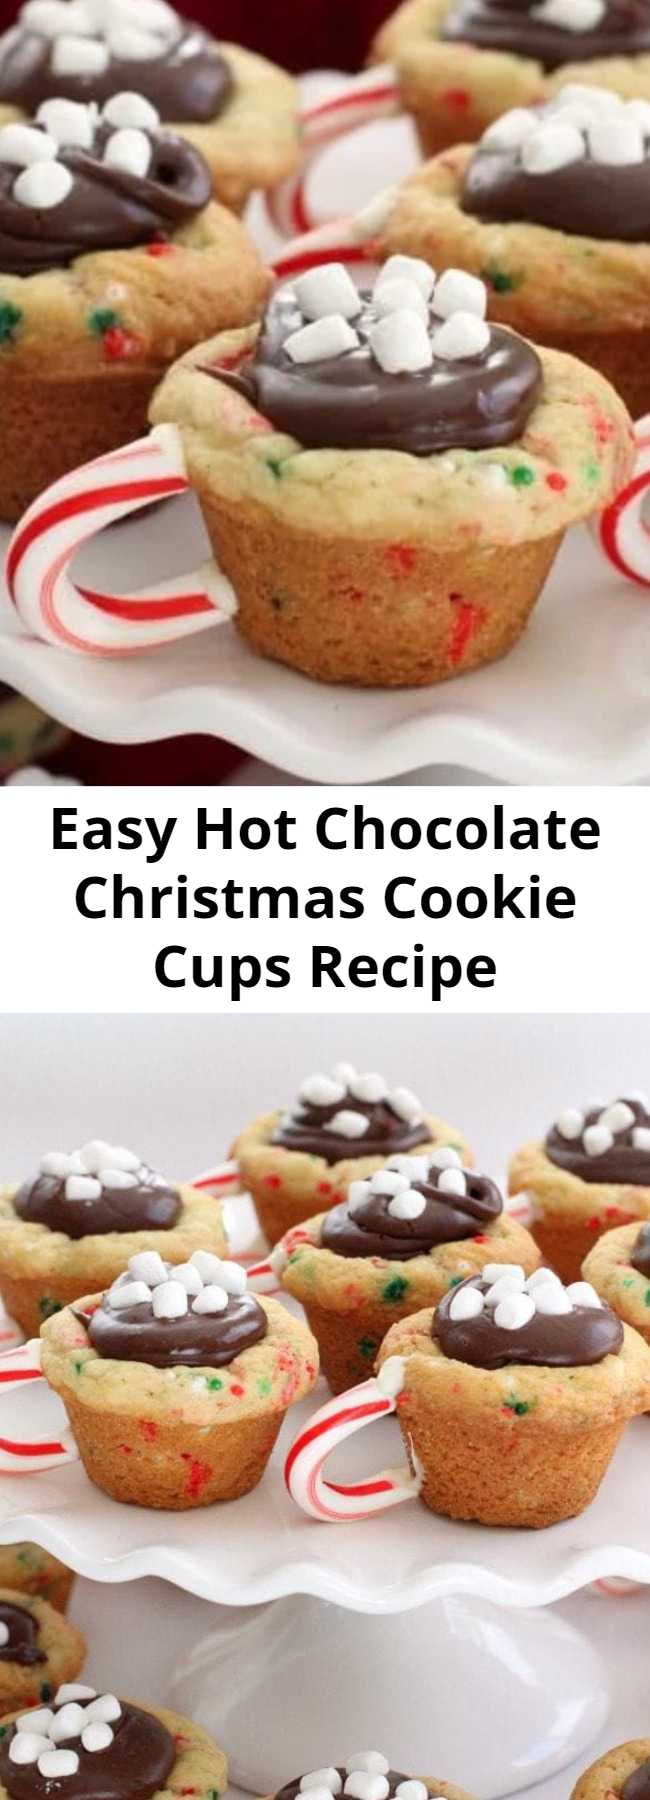 Easy Hot Chocolate Christmas Cookie Cups Recipe - Hot Chocolate Cookie Cups are the most fun & festive Christmas cookies ever! Sugar cookie cups filled with fudge, mini marshmallows & sprinkles with a darling candy cane handle!